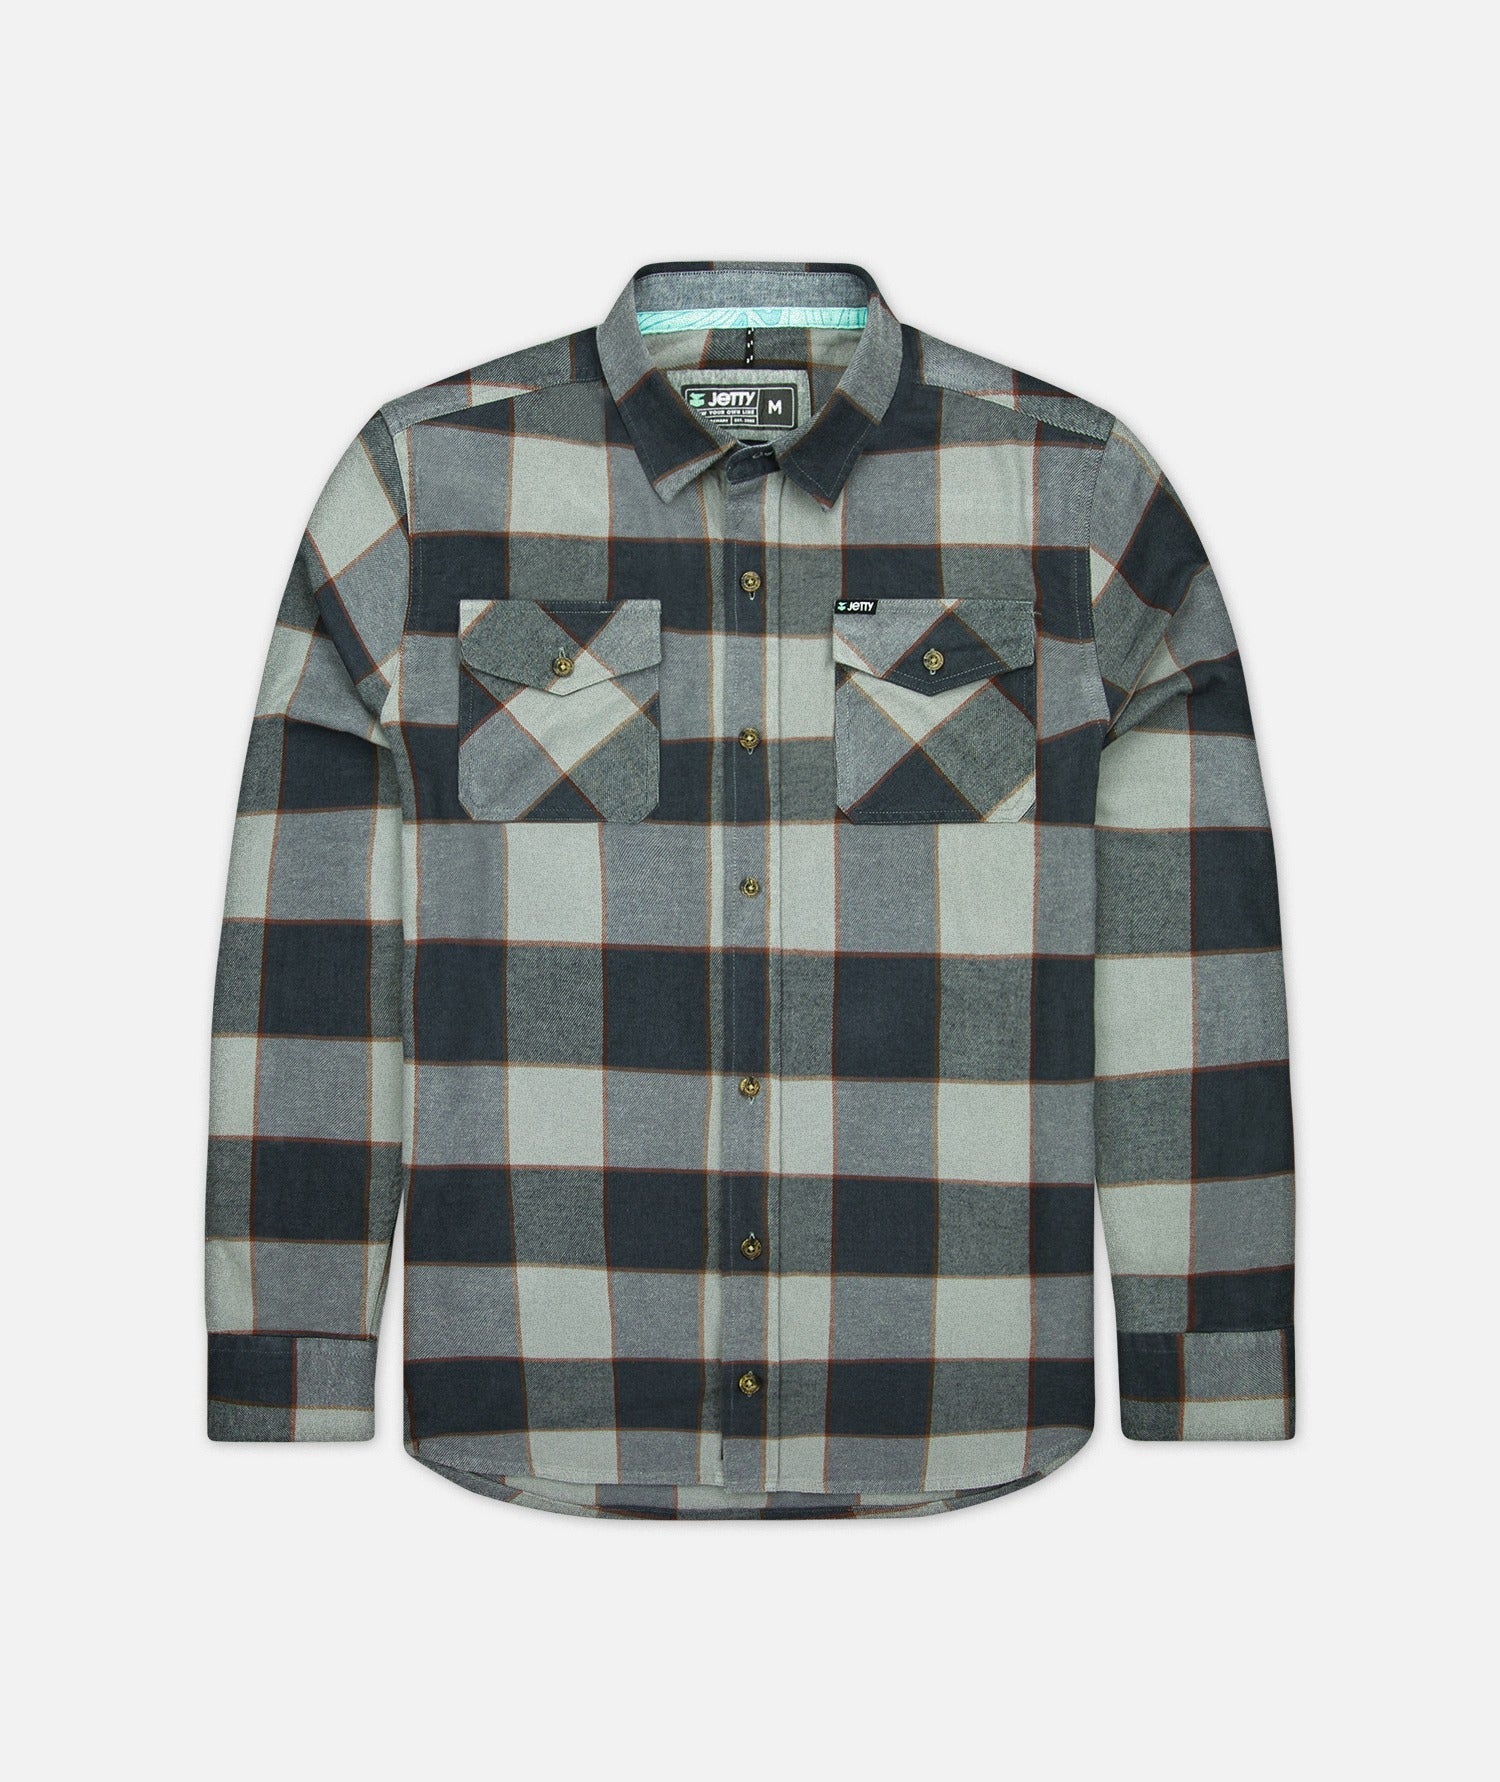 Group: Grom Ripple Flannel